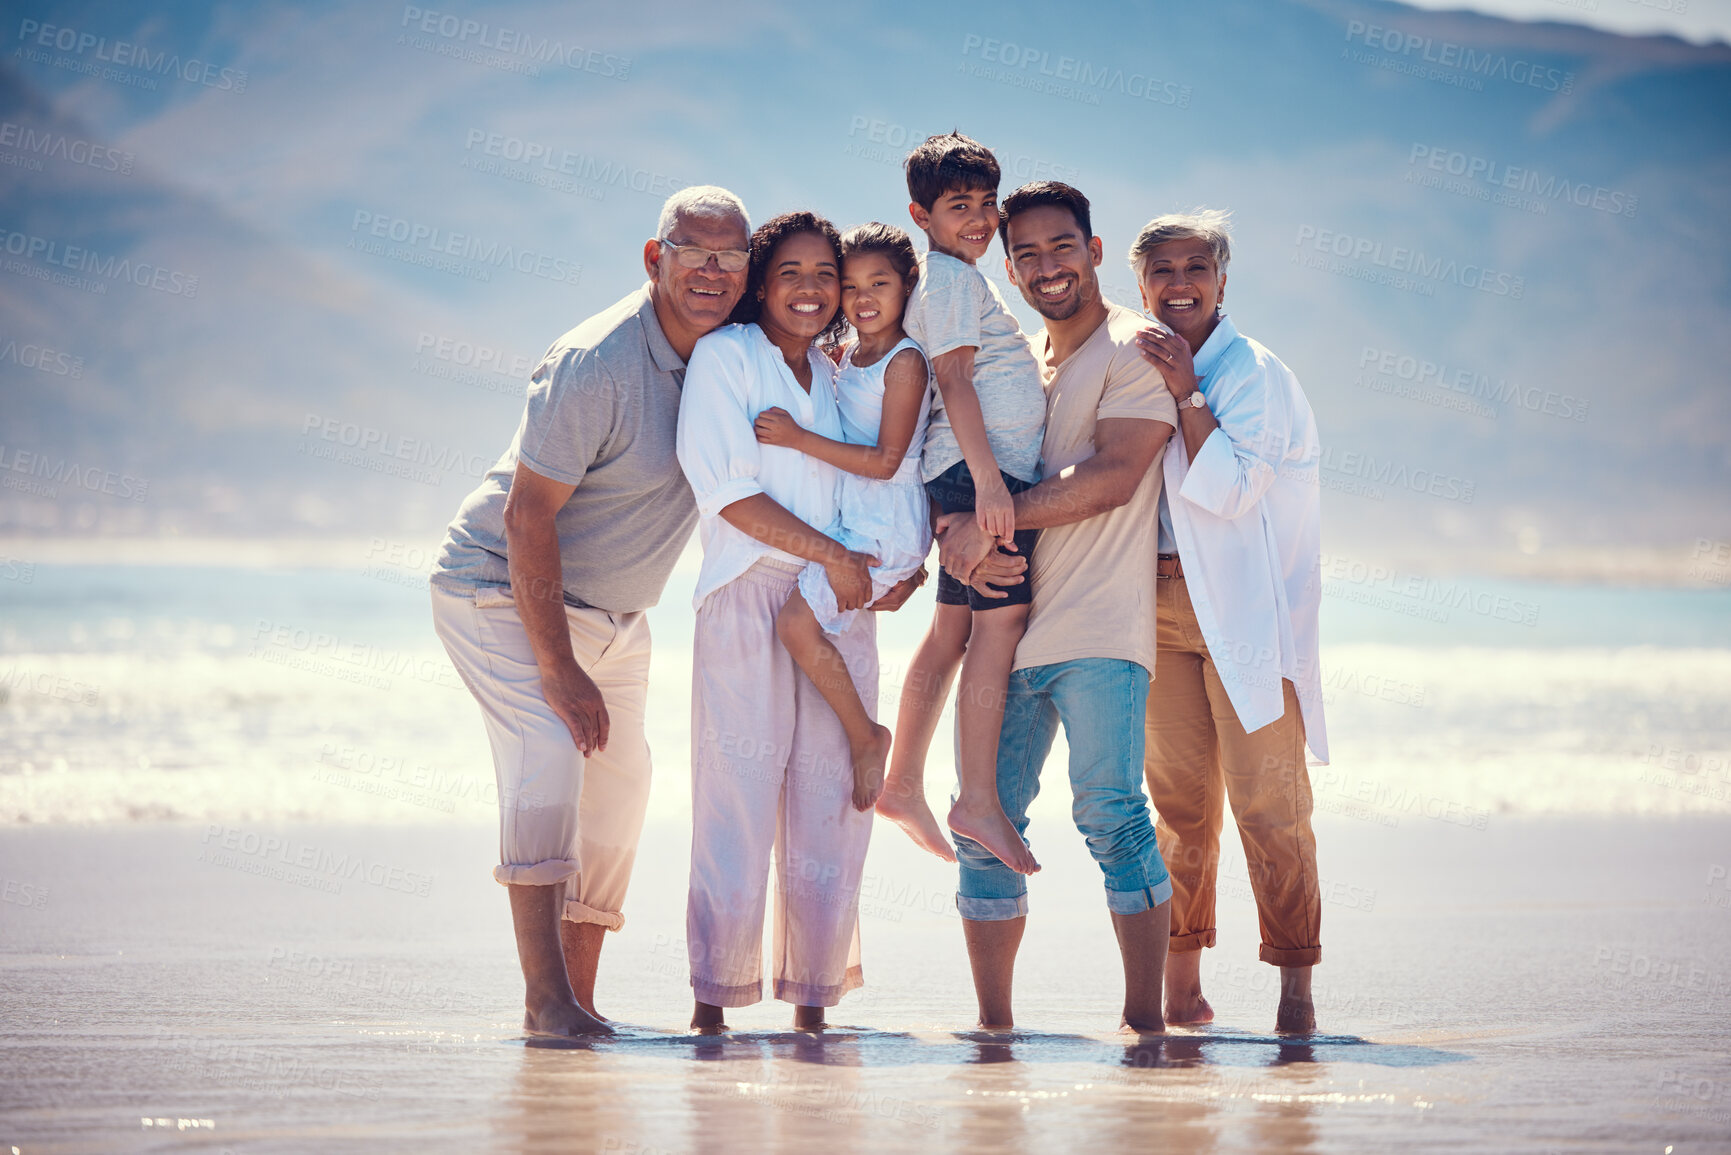 Buy stock photo Beach, portrait of grandparents and parents with kids, smile and bonding together on ocean vacation. Sun, fun and happiness for hispanic men, women and children on summer holiday adventure in Mexico.